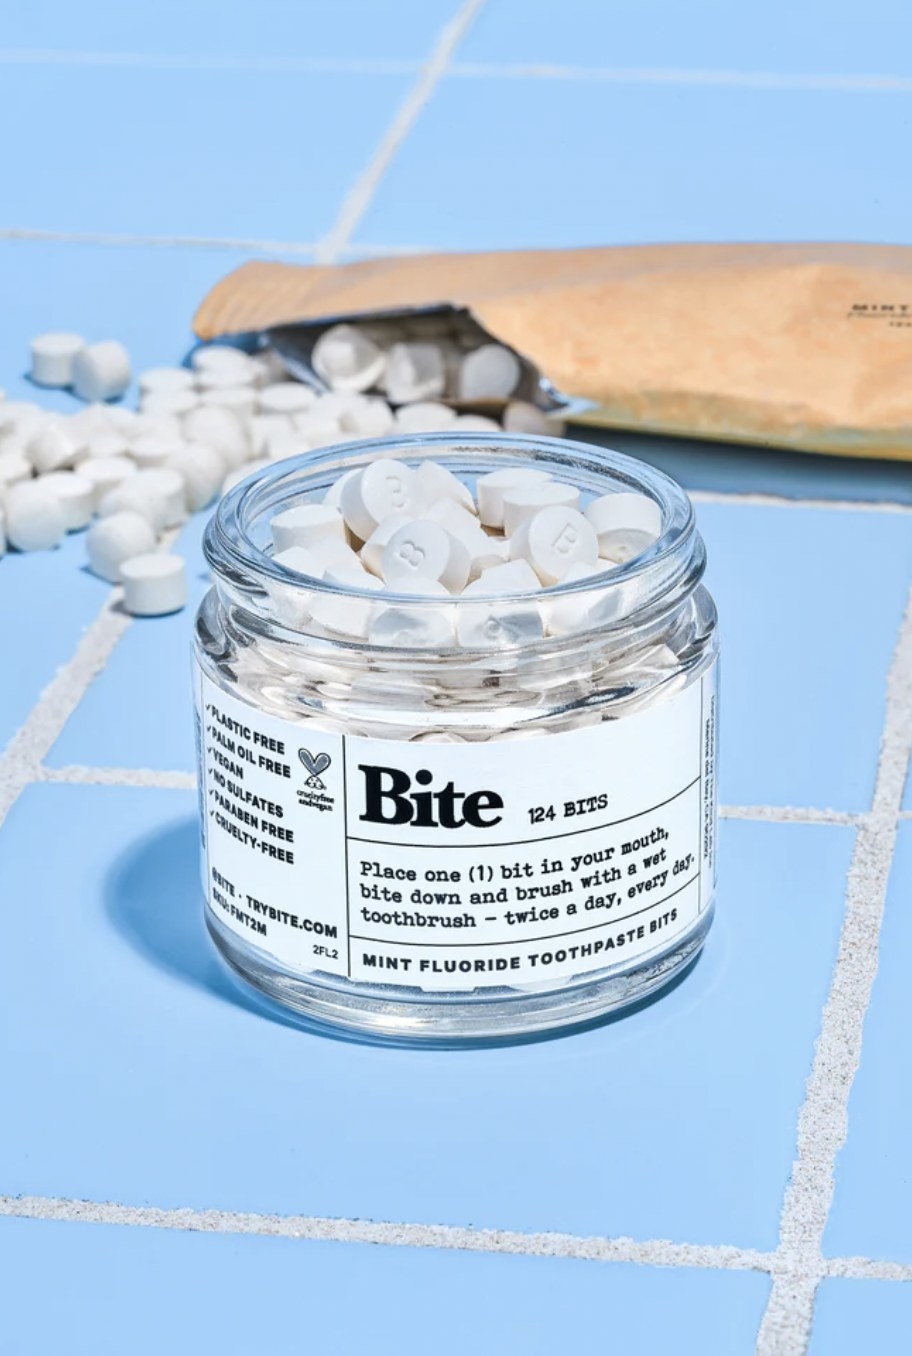 The mint fluoride toothpaste bits in glass jar